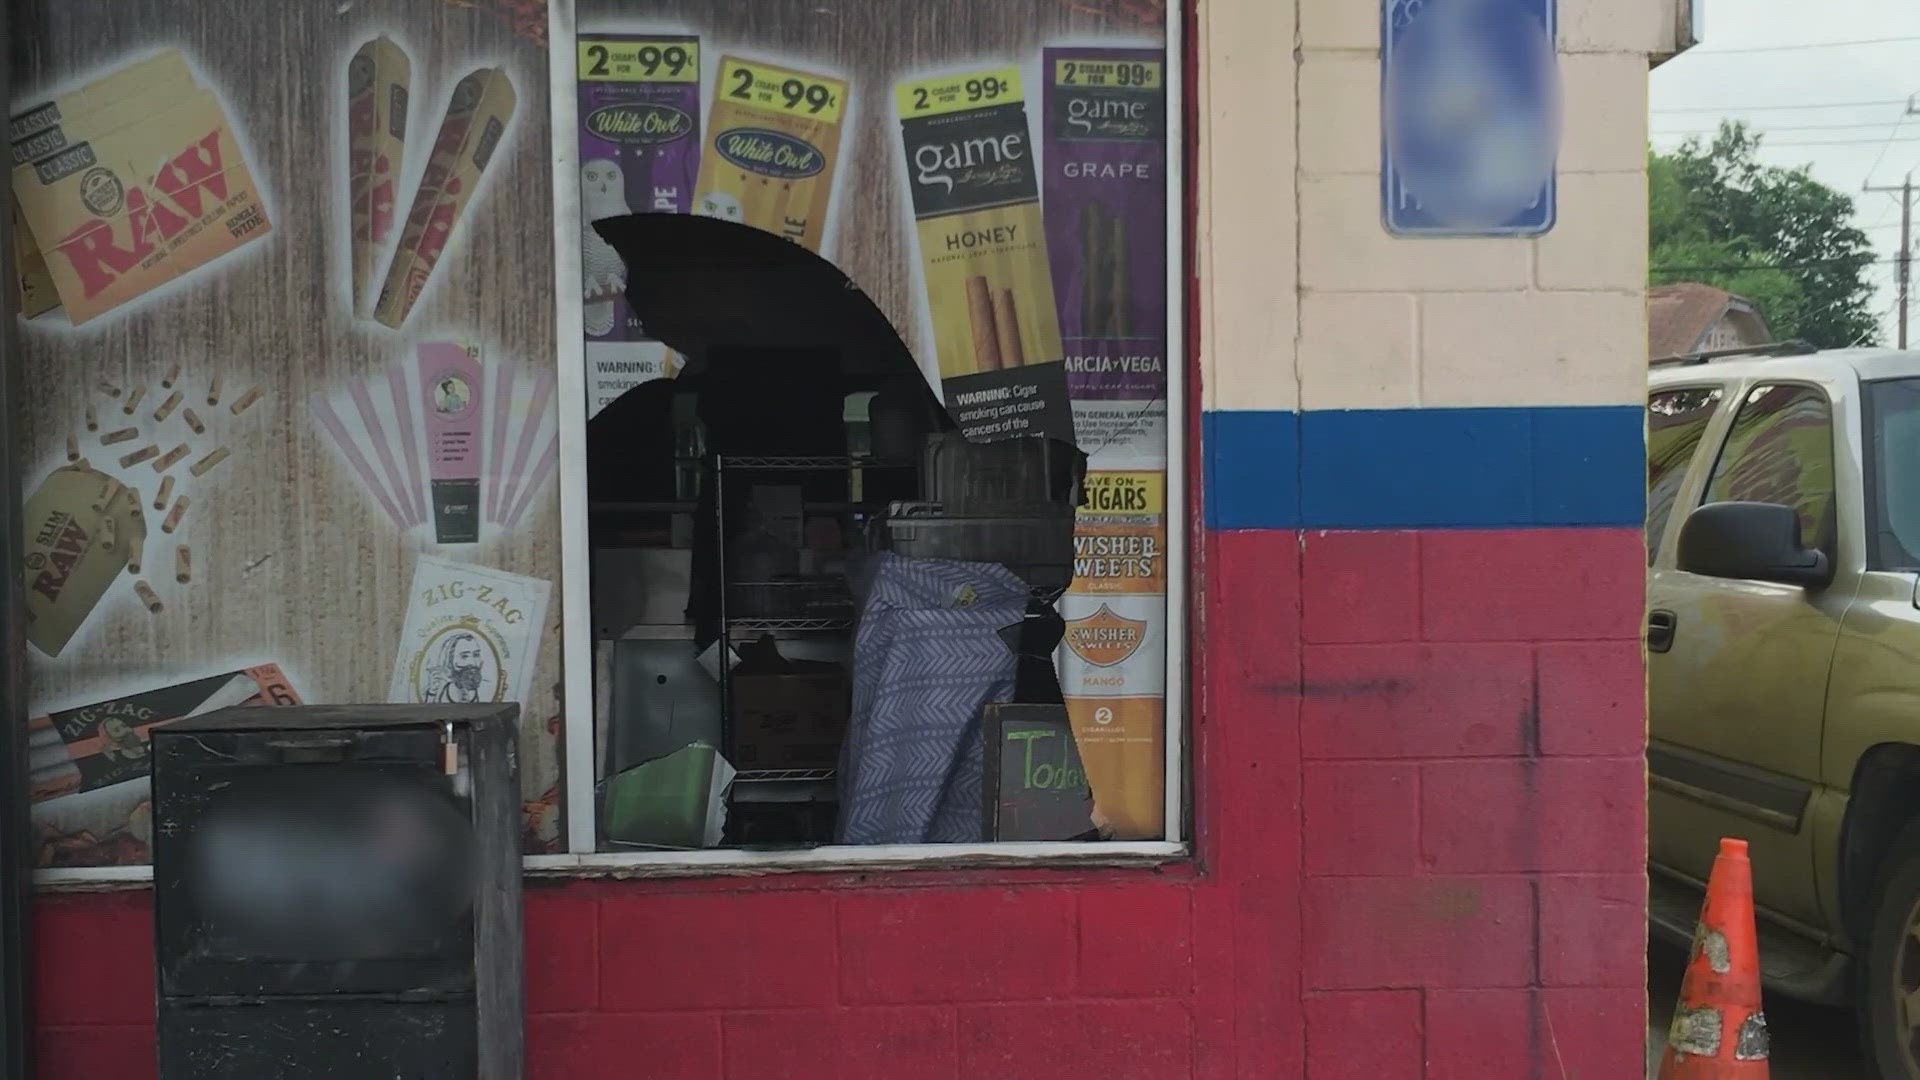 'Cubby's Eatery', which is inside Pik Nik Convenience Store, had to close for a day because of the damage left behind.